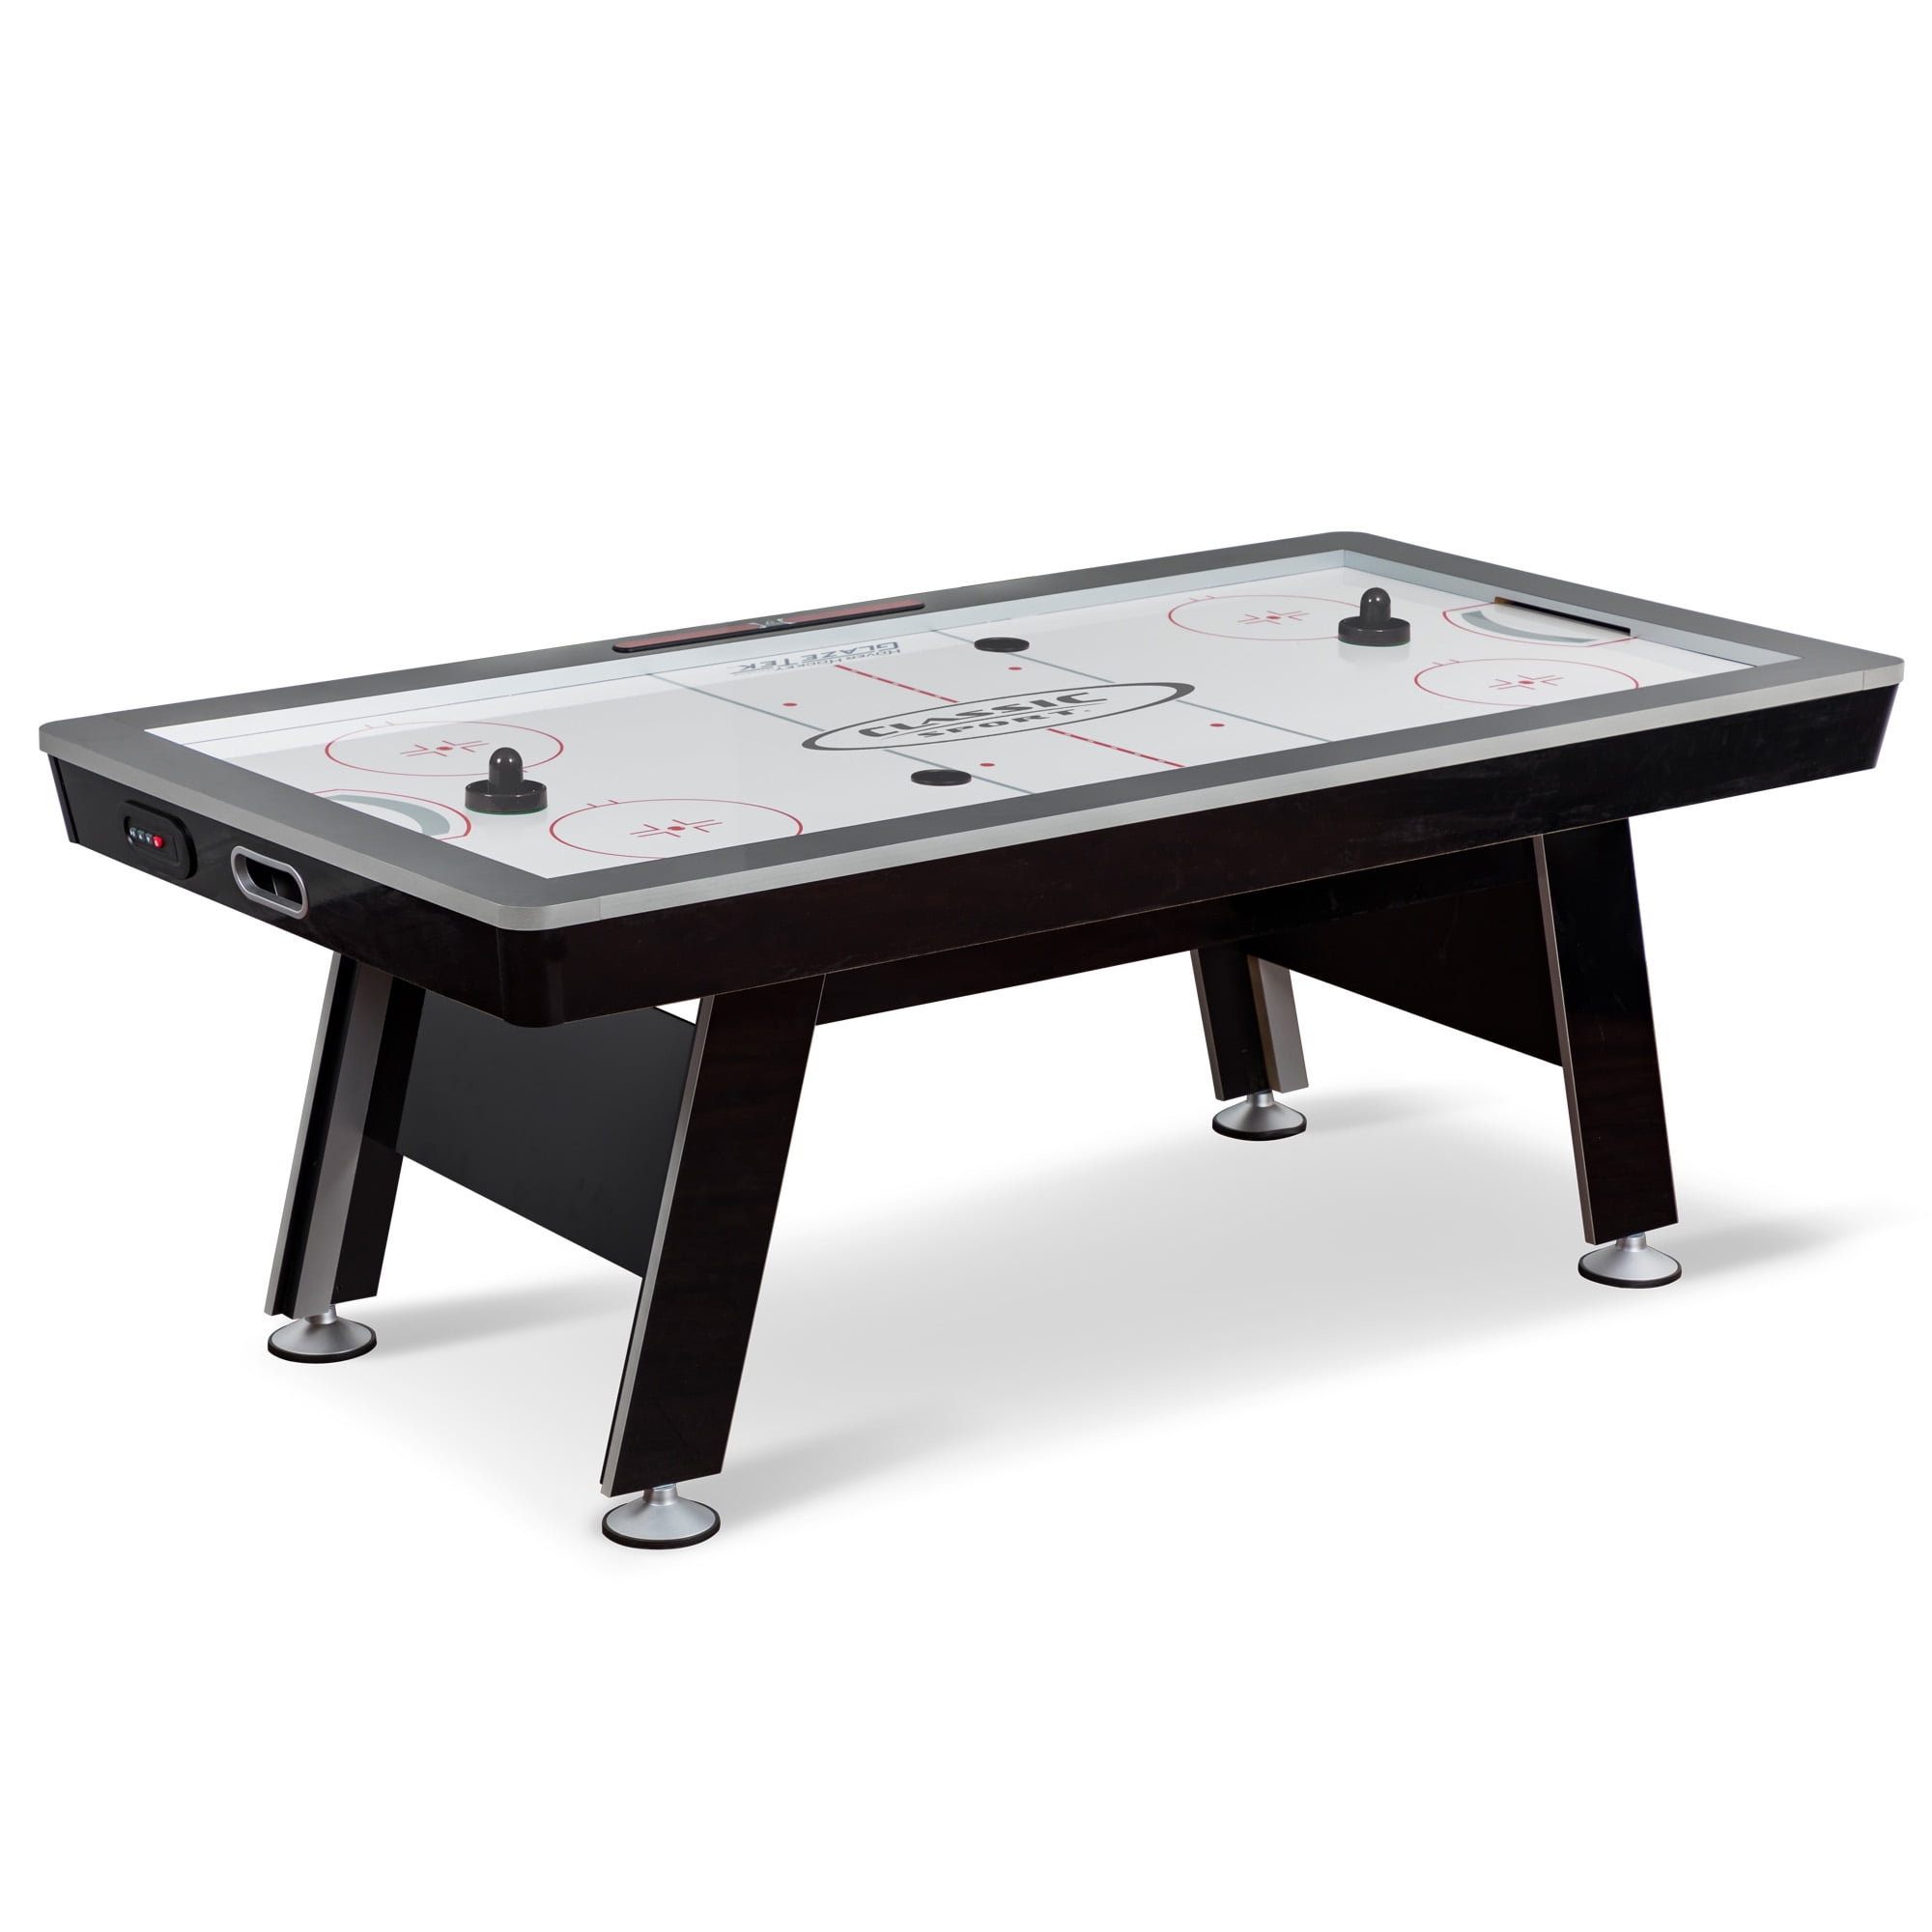 Classic Sport X-Cell 84 Air Hockey Table with LED Scoring